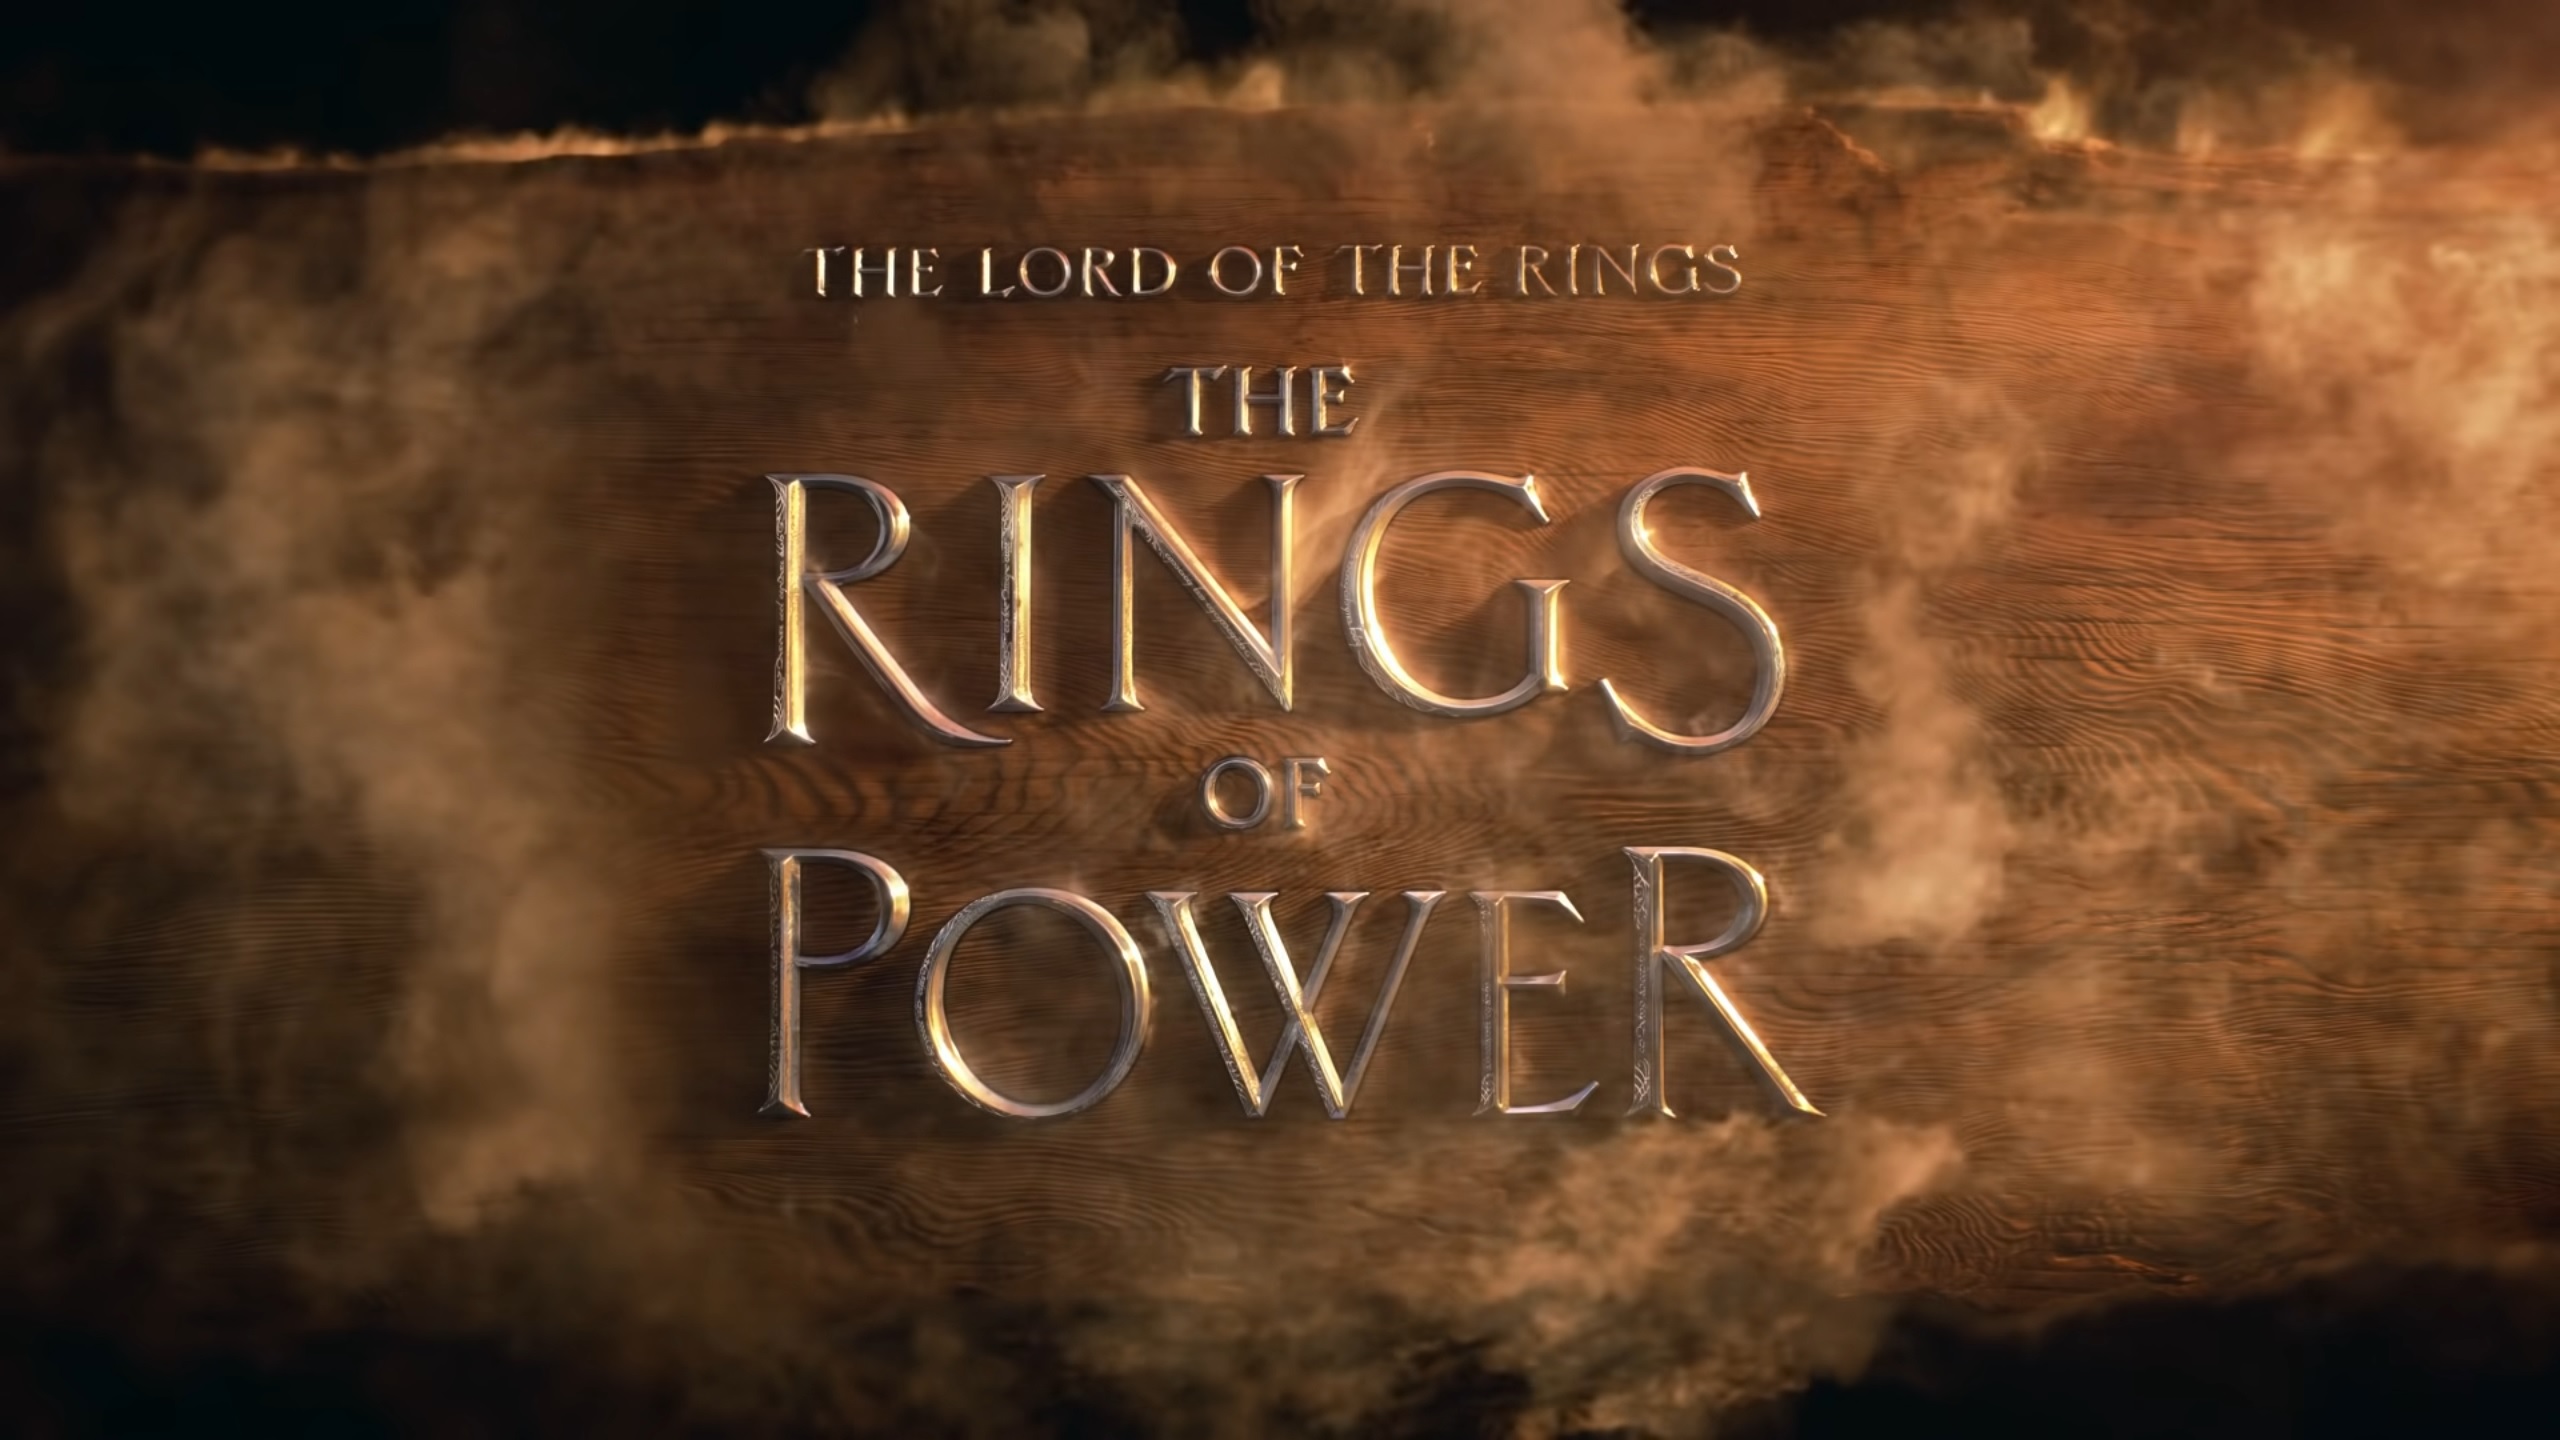 This was the most epic moment in the new Lord of the Rings series trailer